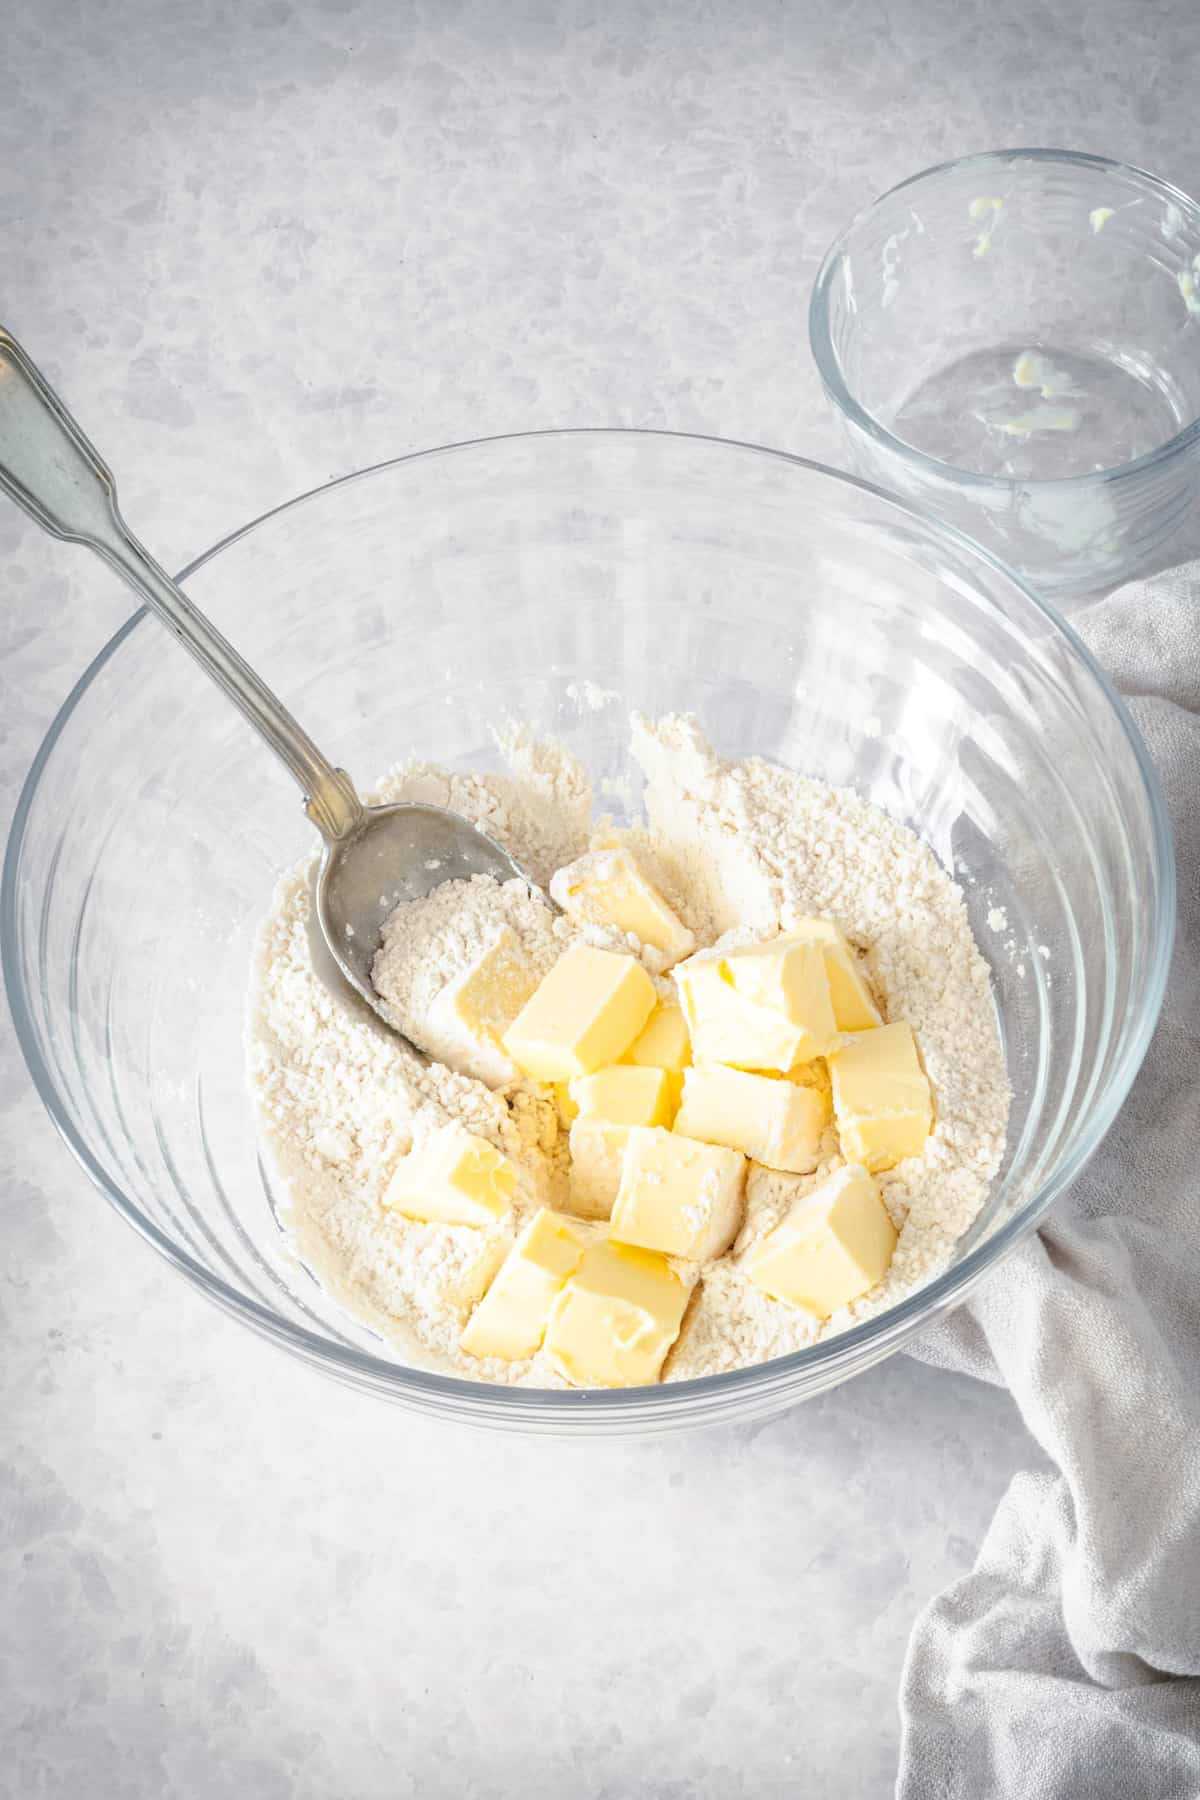 Butter being cut into pastry dough